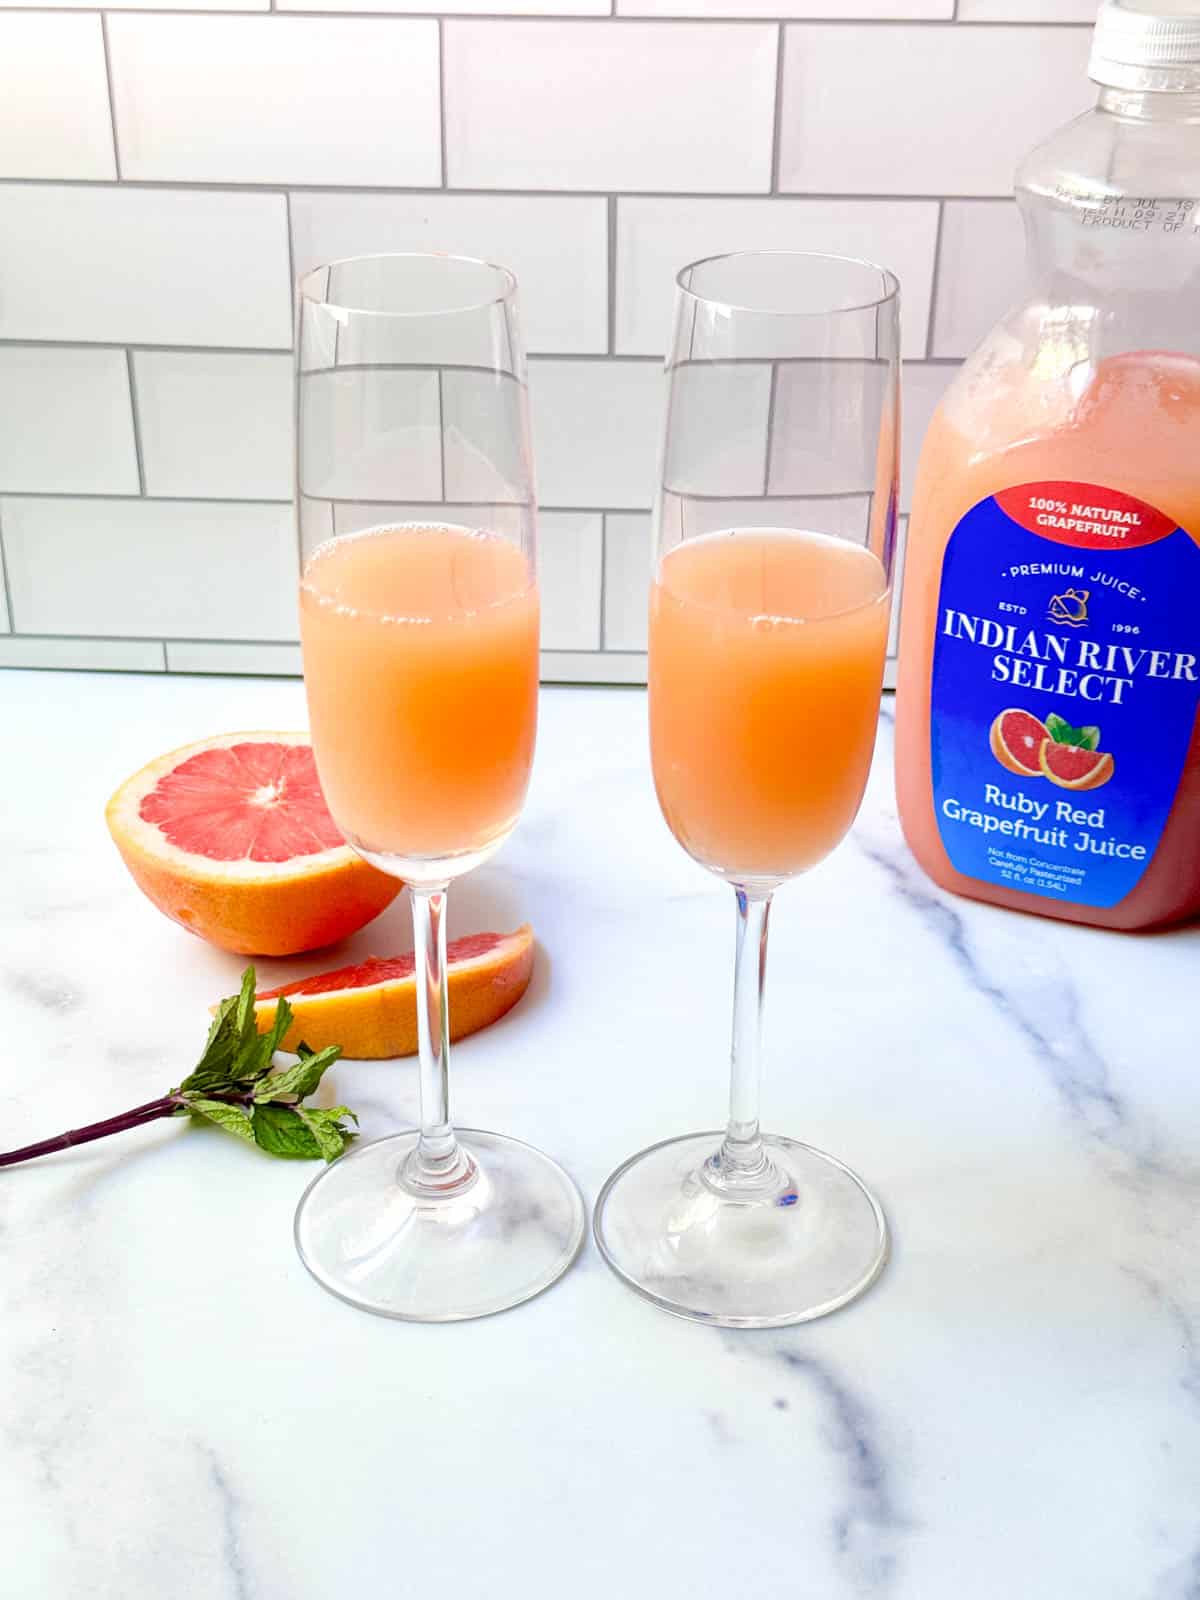 Grapefruit juice in a flute glass with fresh grapefruit, mint, and bottle of juice on white counter.